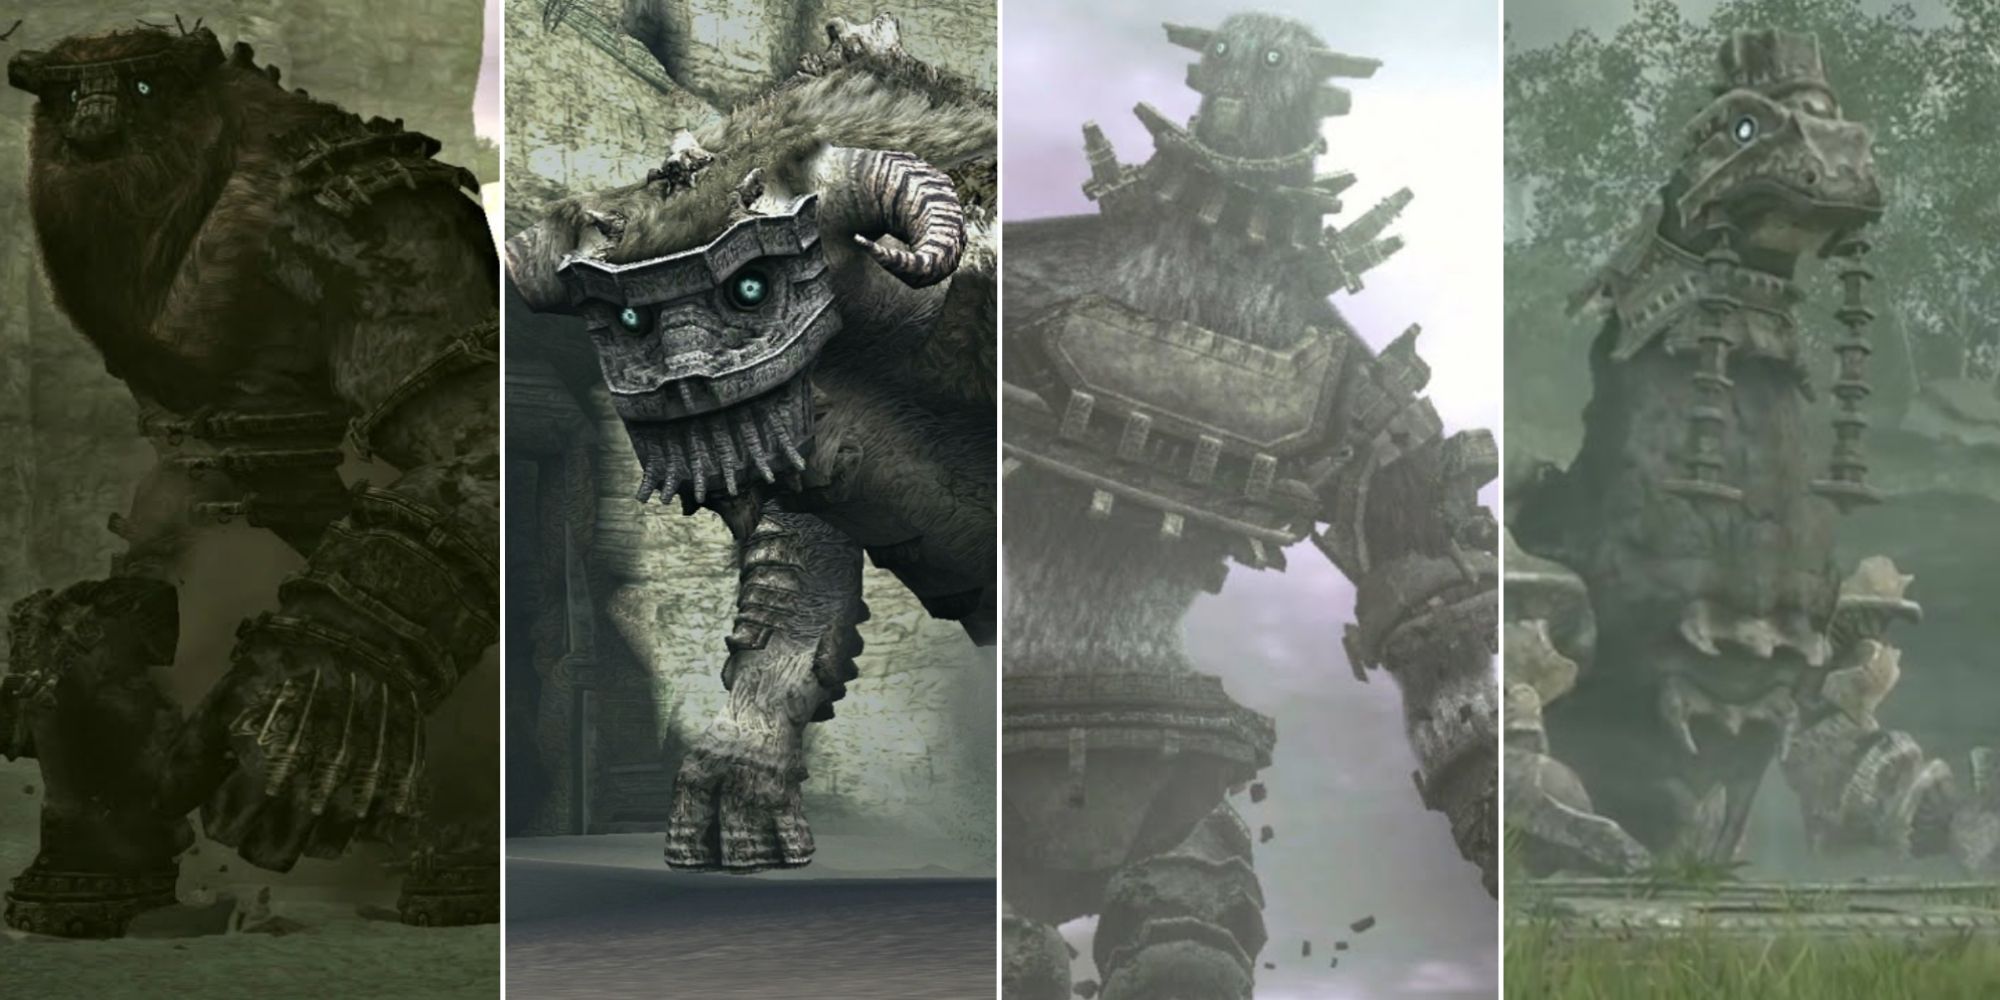 Shadow of the Colossus boss maps and locations - Polygon